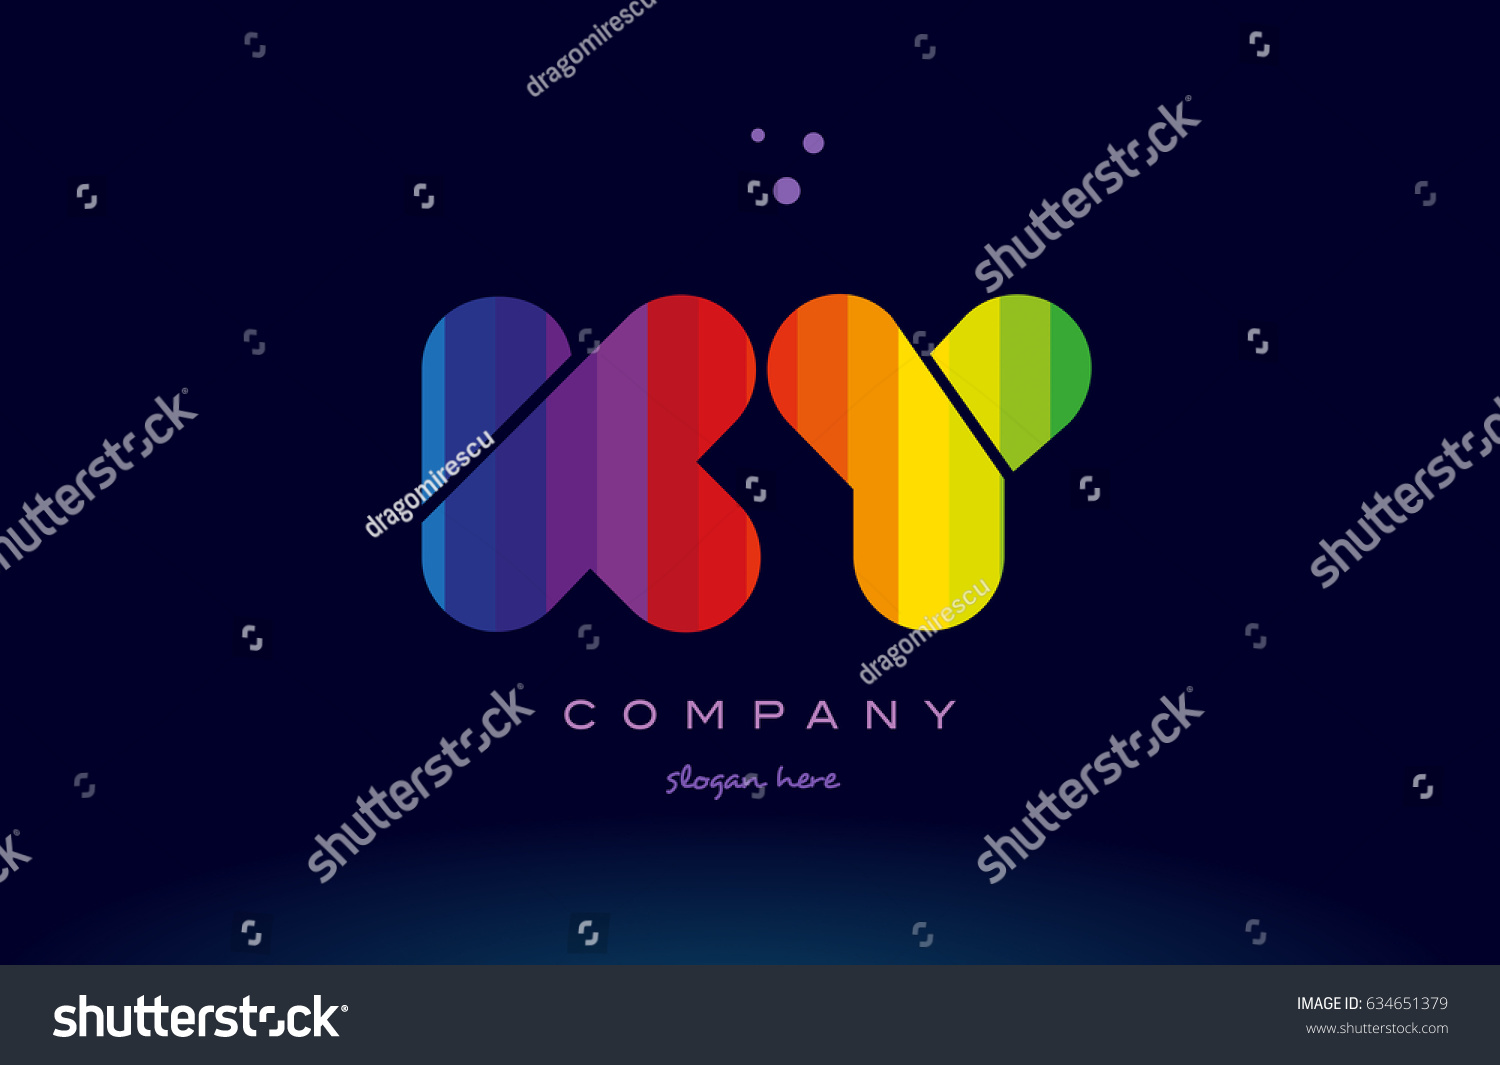 Ky K Y Alphabet Letter Colorful Stock Vector Royalty Free 634651379 Shutterstock